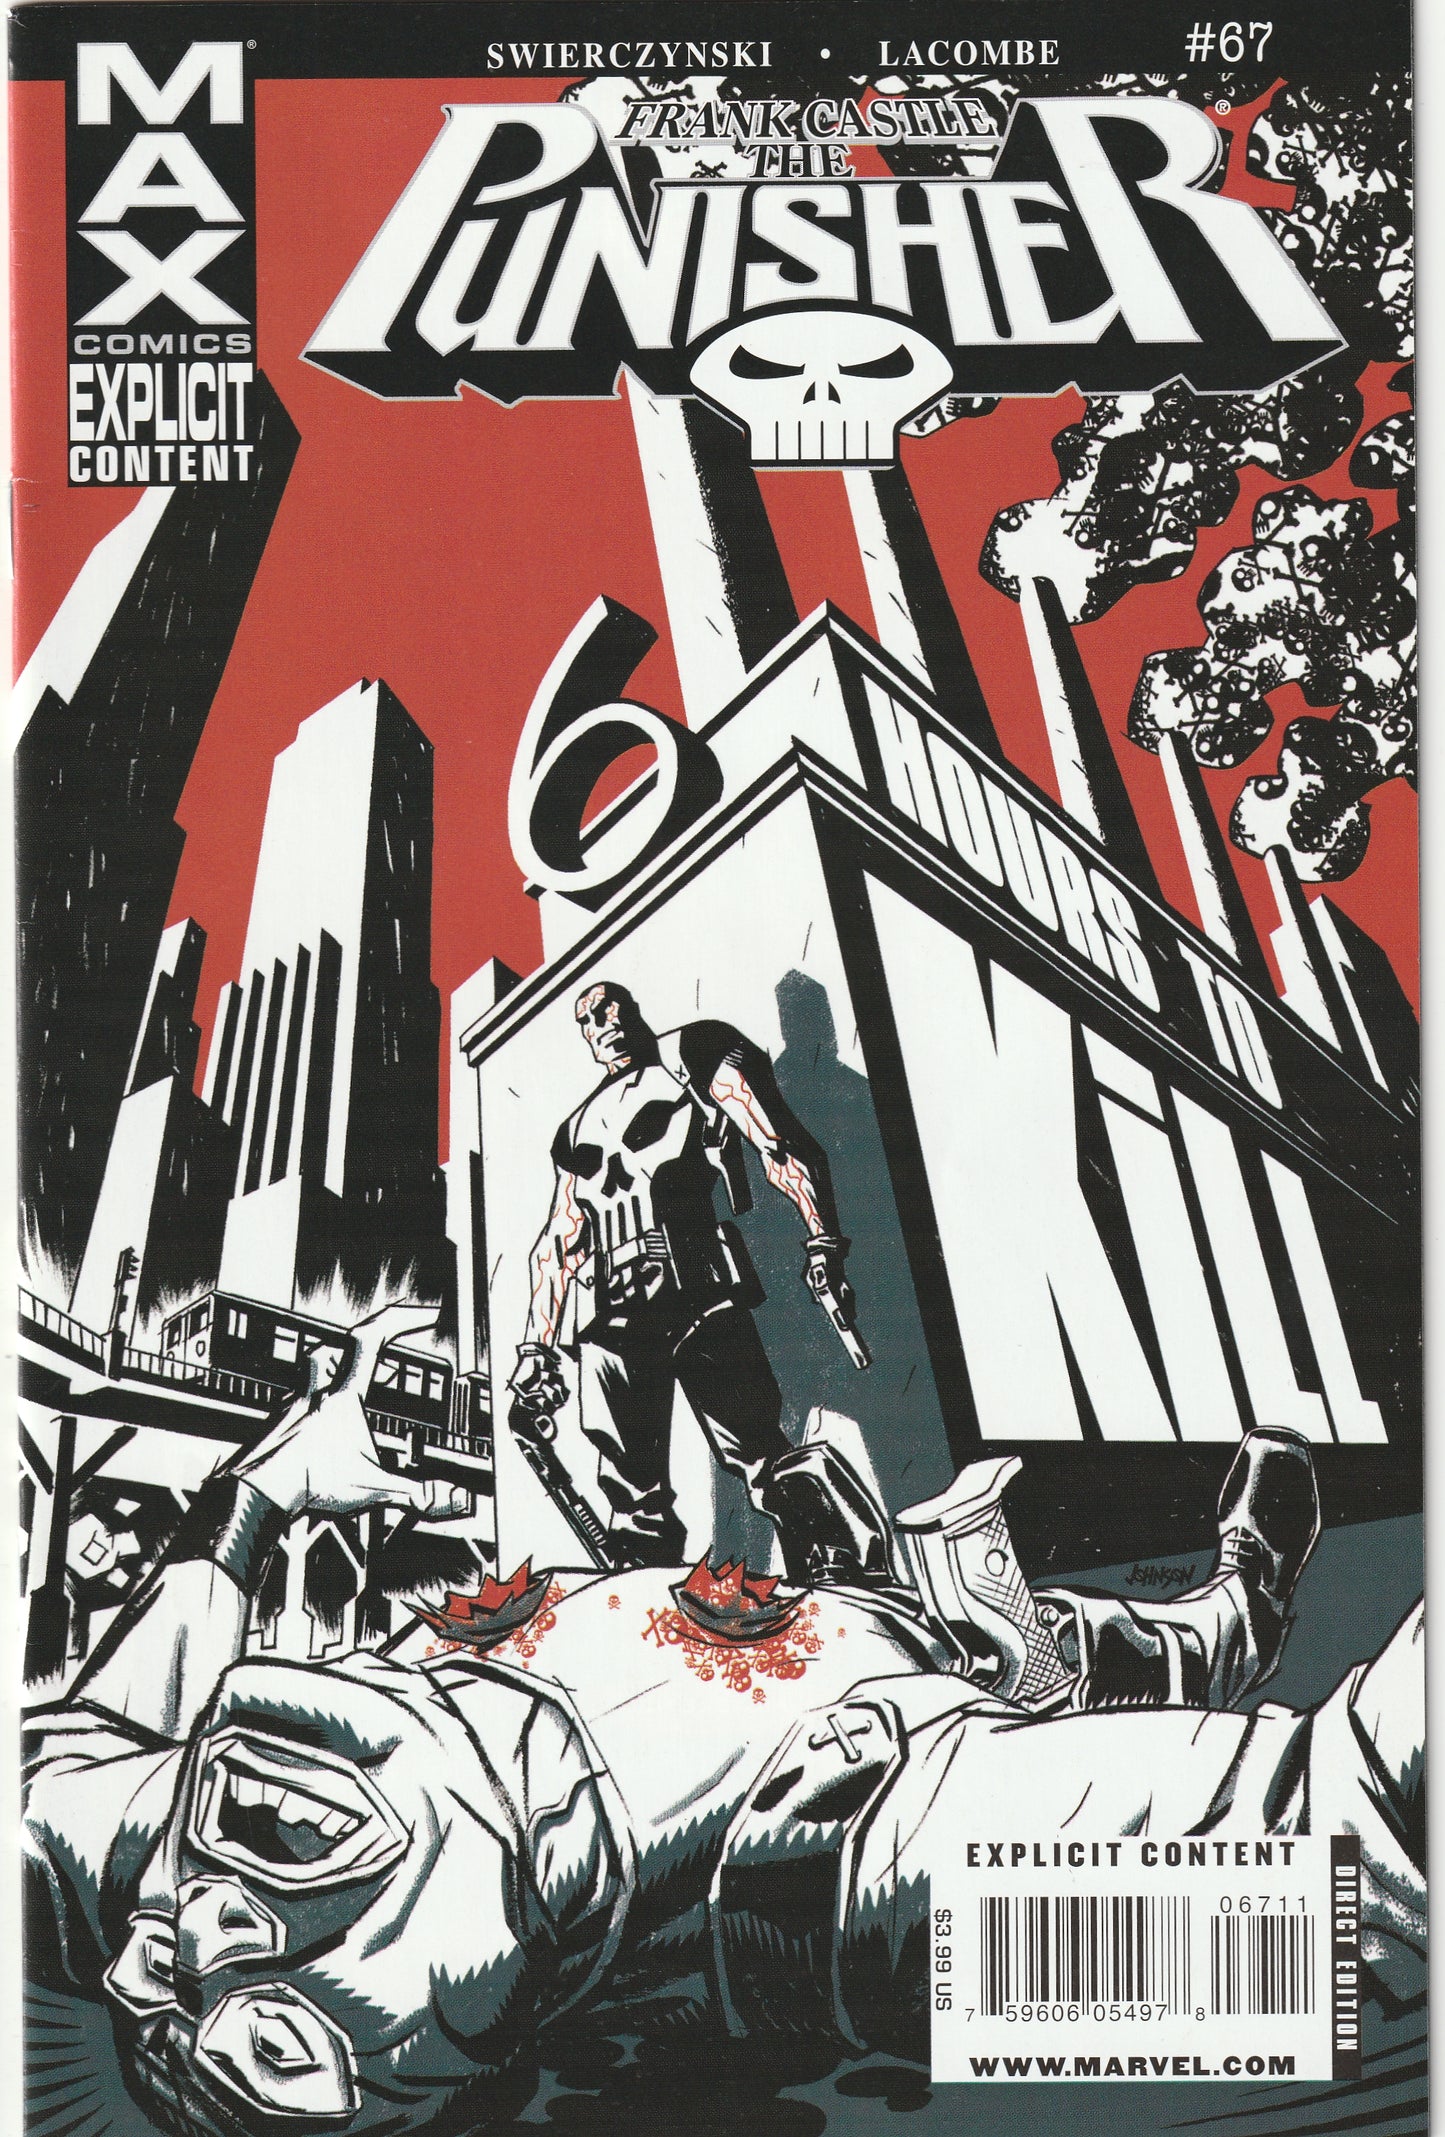 The Punisher #67 (MAX, 2009)